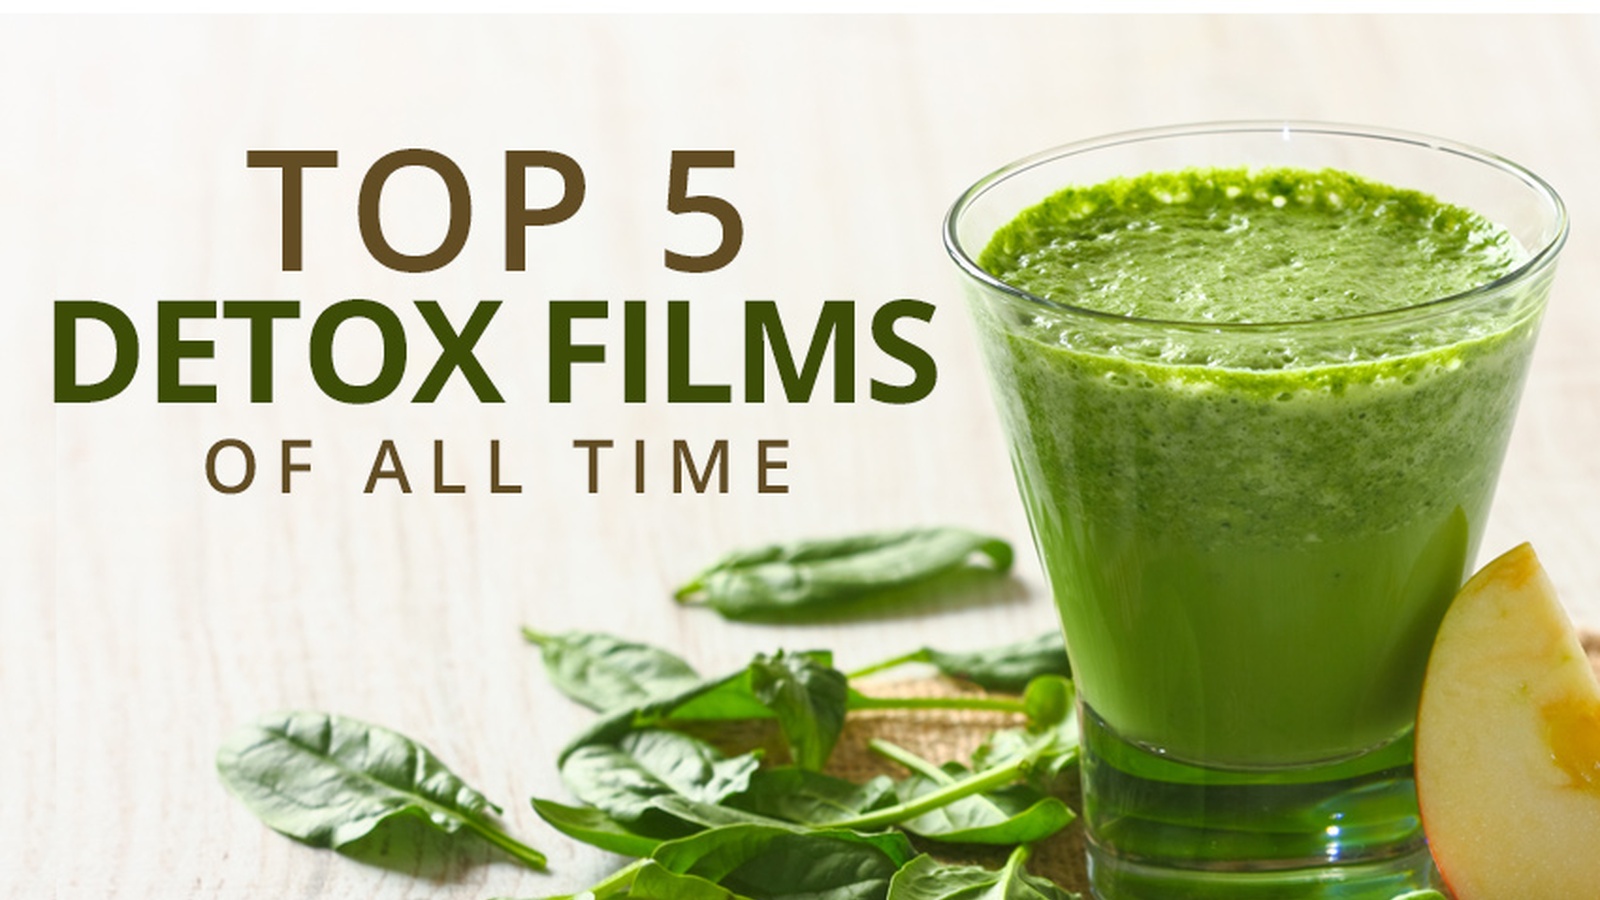 Top Detox Films Of All Time